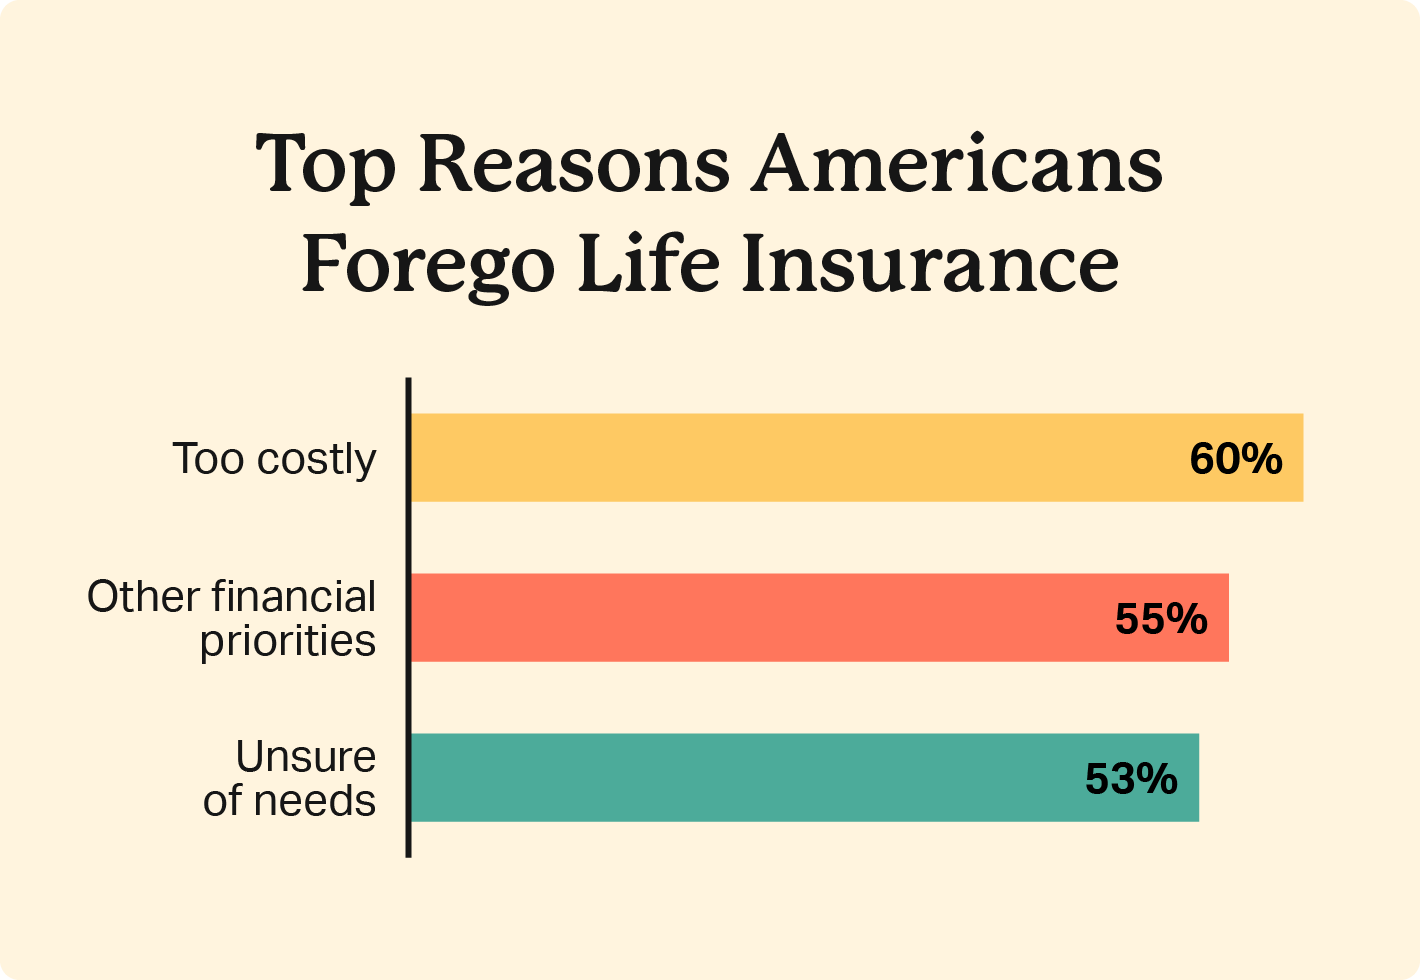 A bar graph compares the top reasons people don't get life insurance, with 60% agreeing it's too costly. 